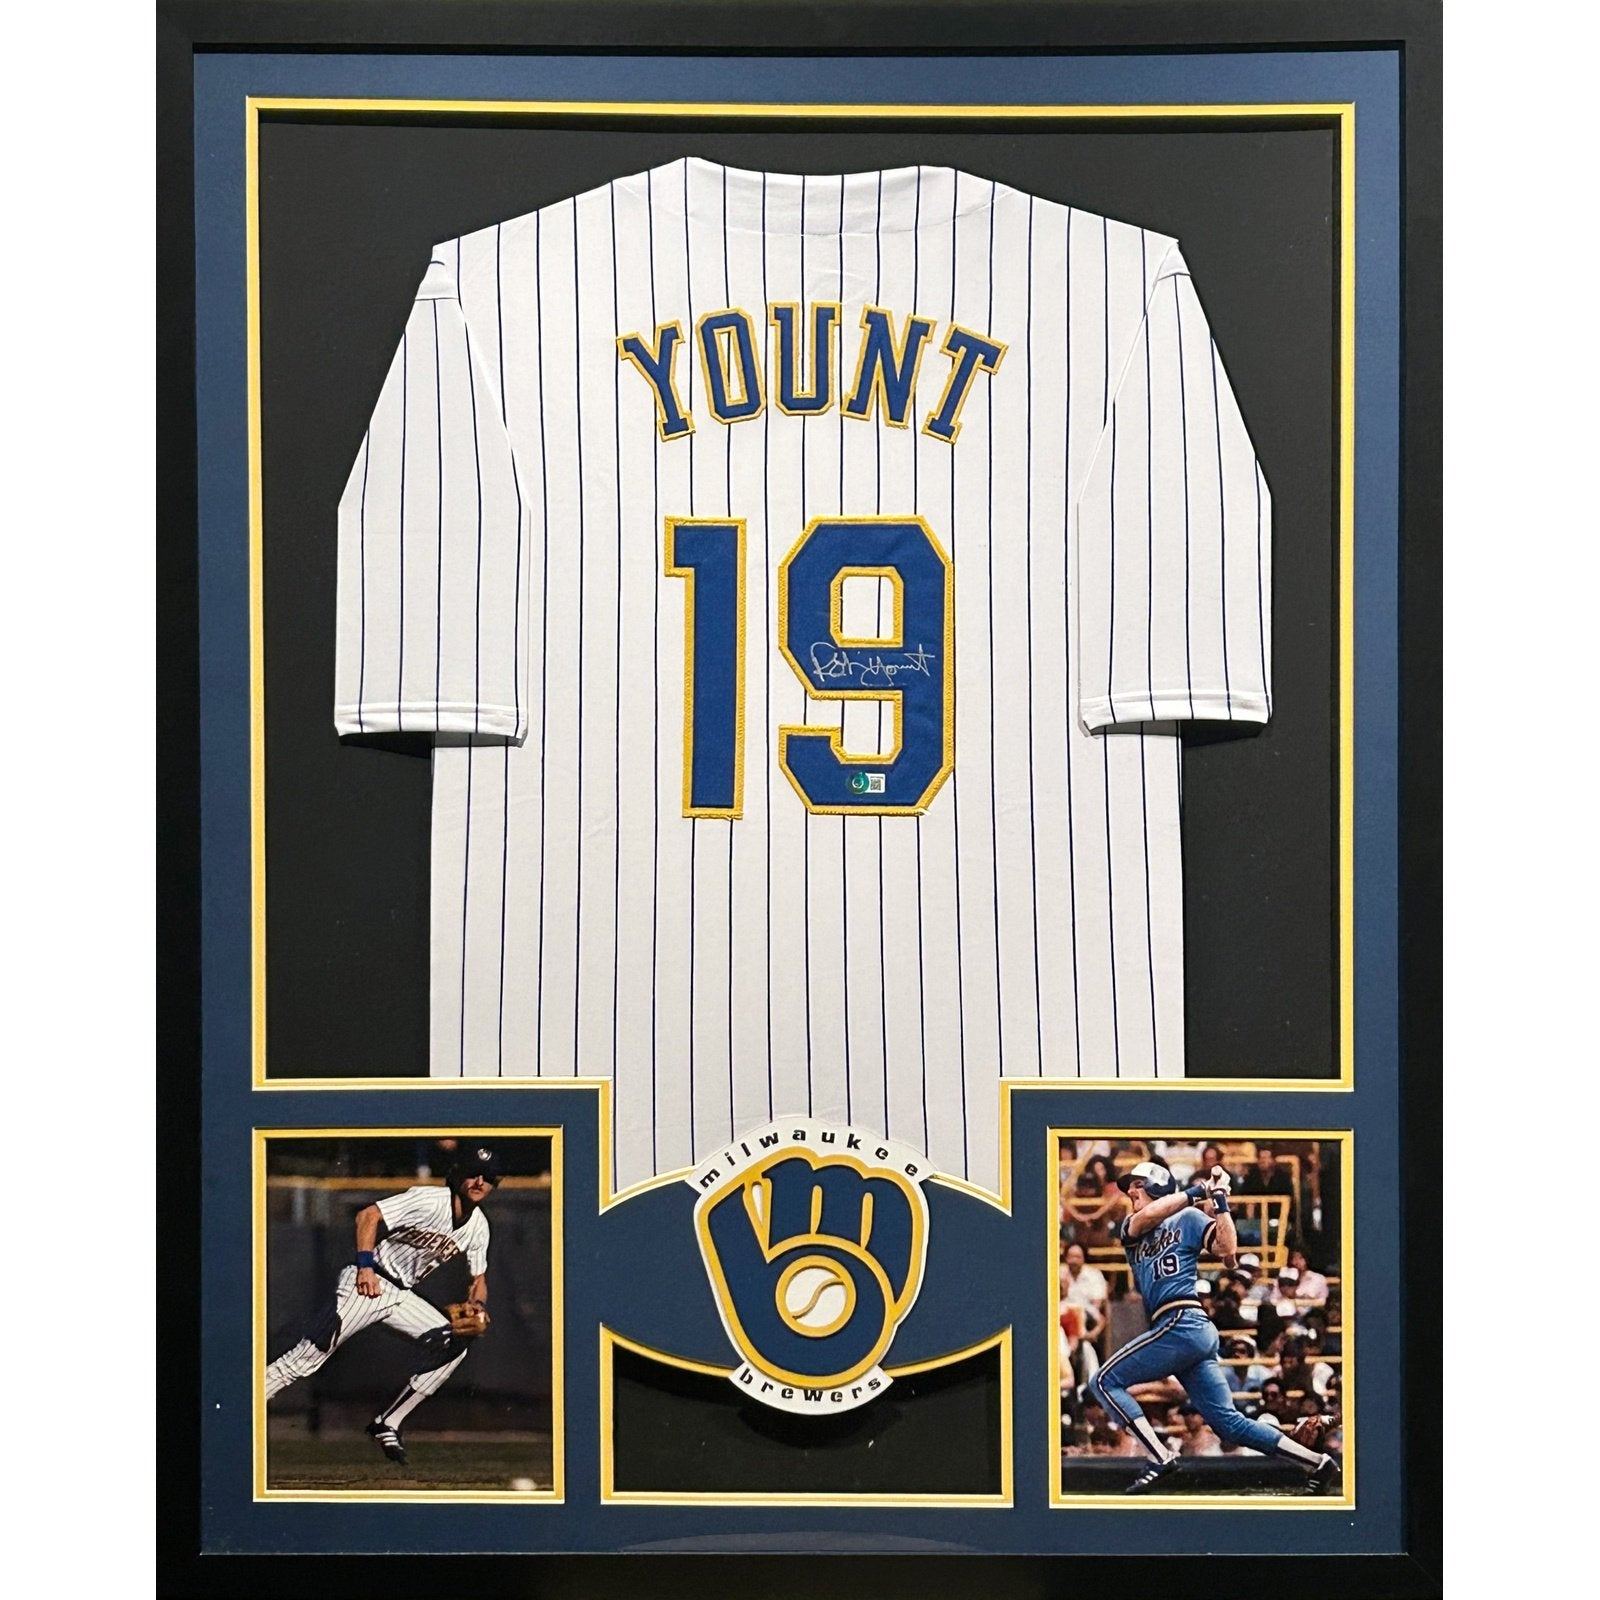 robin yount brewers jersey